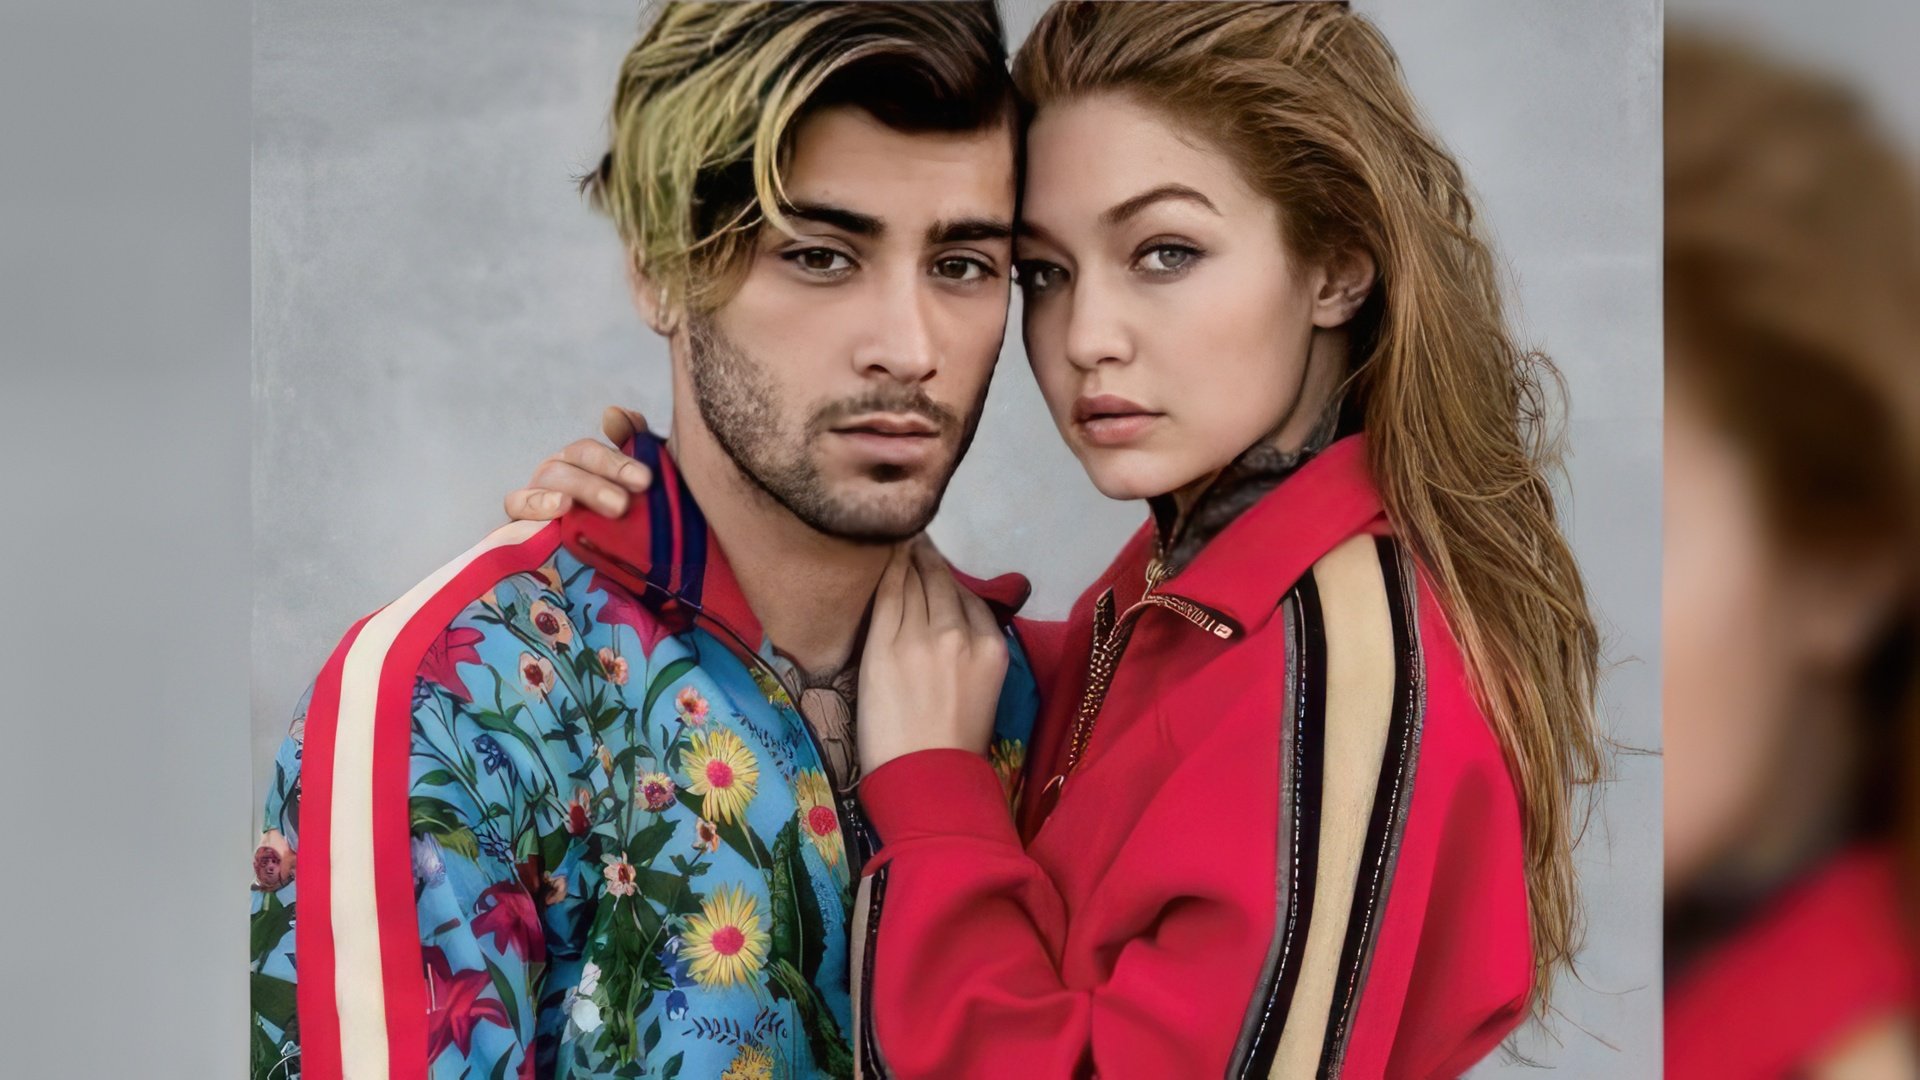 Zayn Malik and his girlfriend on the cover of Vogue (2017)